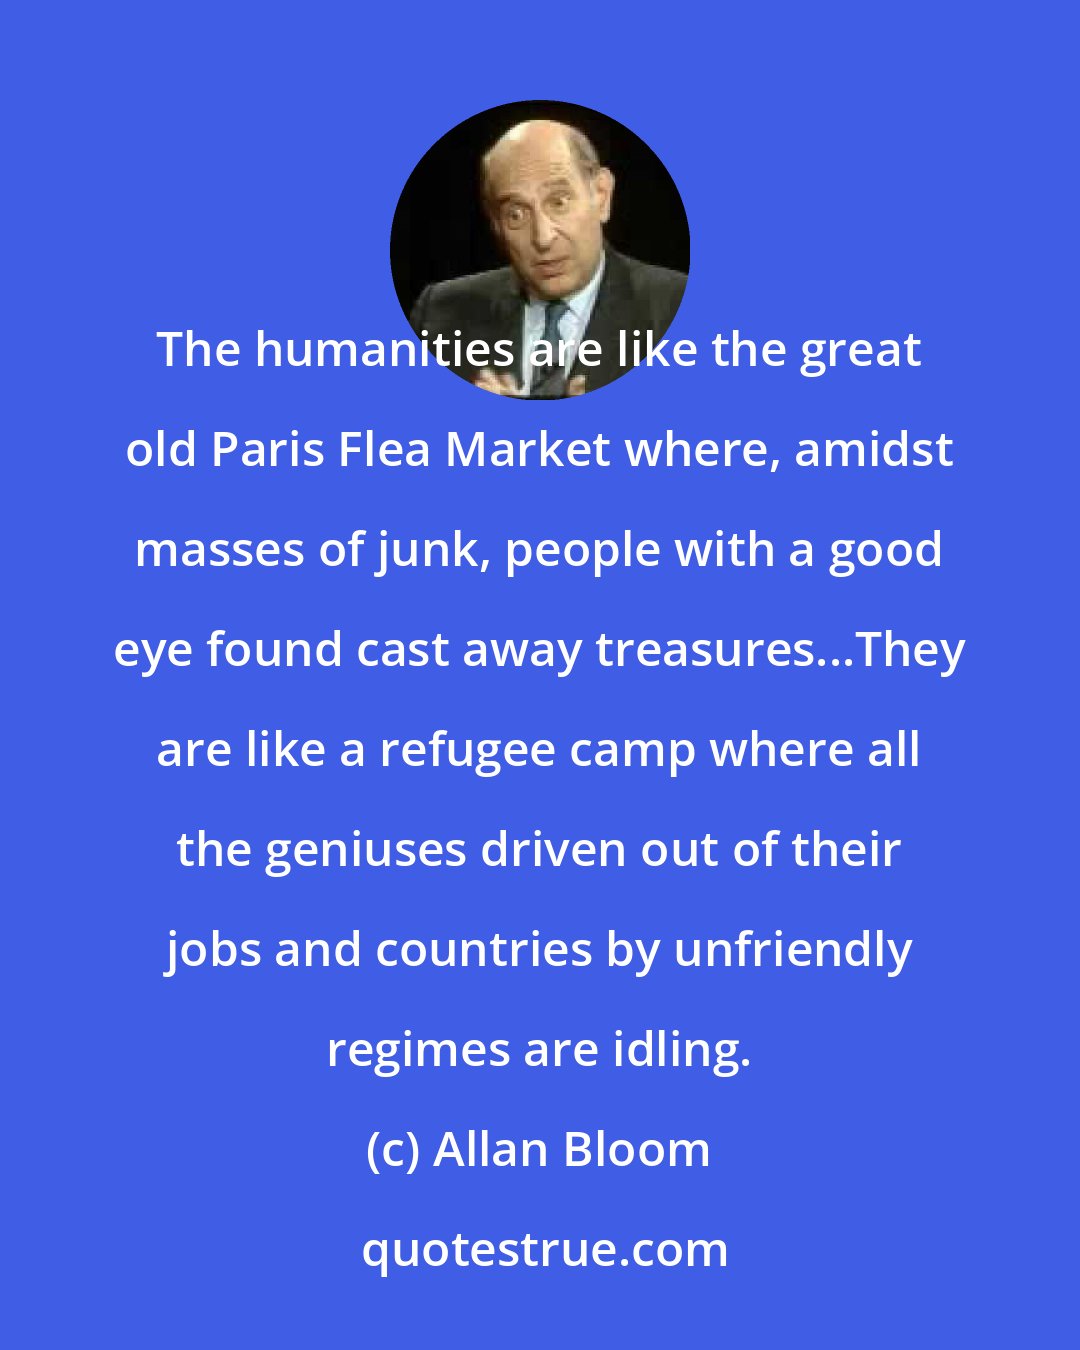 Allan Bloom: The humanities are like the great old Paris Flea Market where, amidst masses of junk, people with a good eye found cast away treasures...They are like a refugee camp where all the geniuses driven out of their jobs and countries by unfriendly regimes are idling.